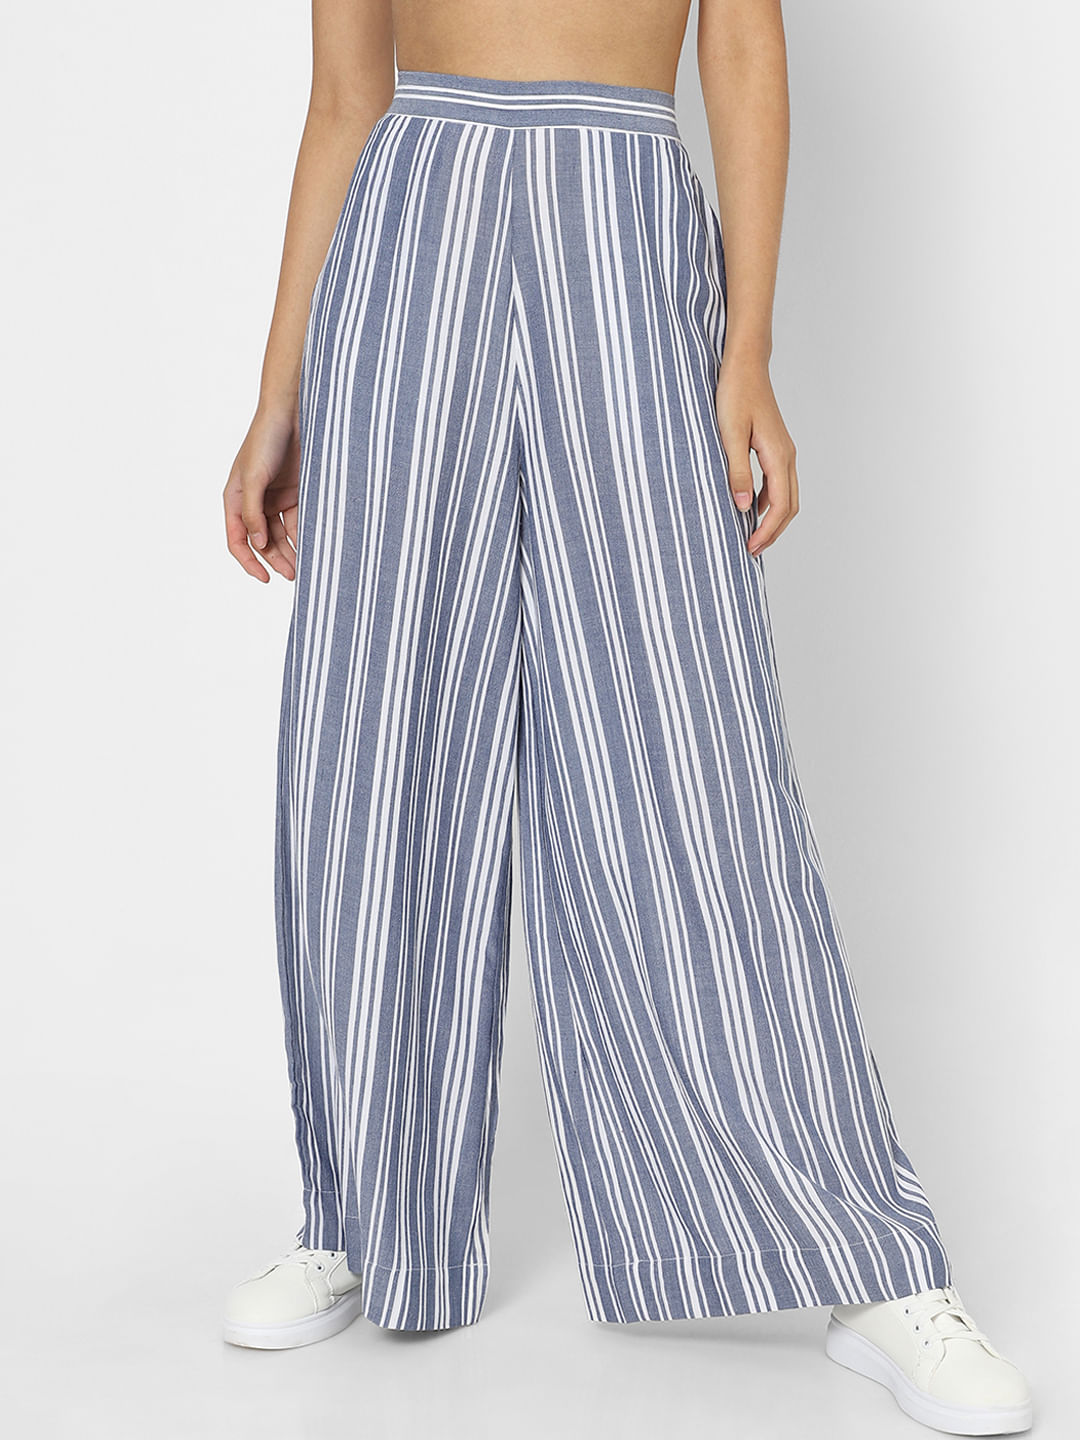 River Island coord stripe palazzo trousers in white  ASOS